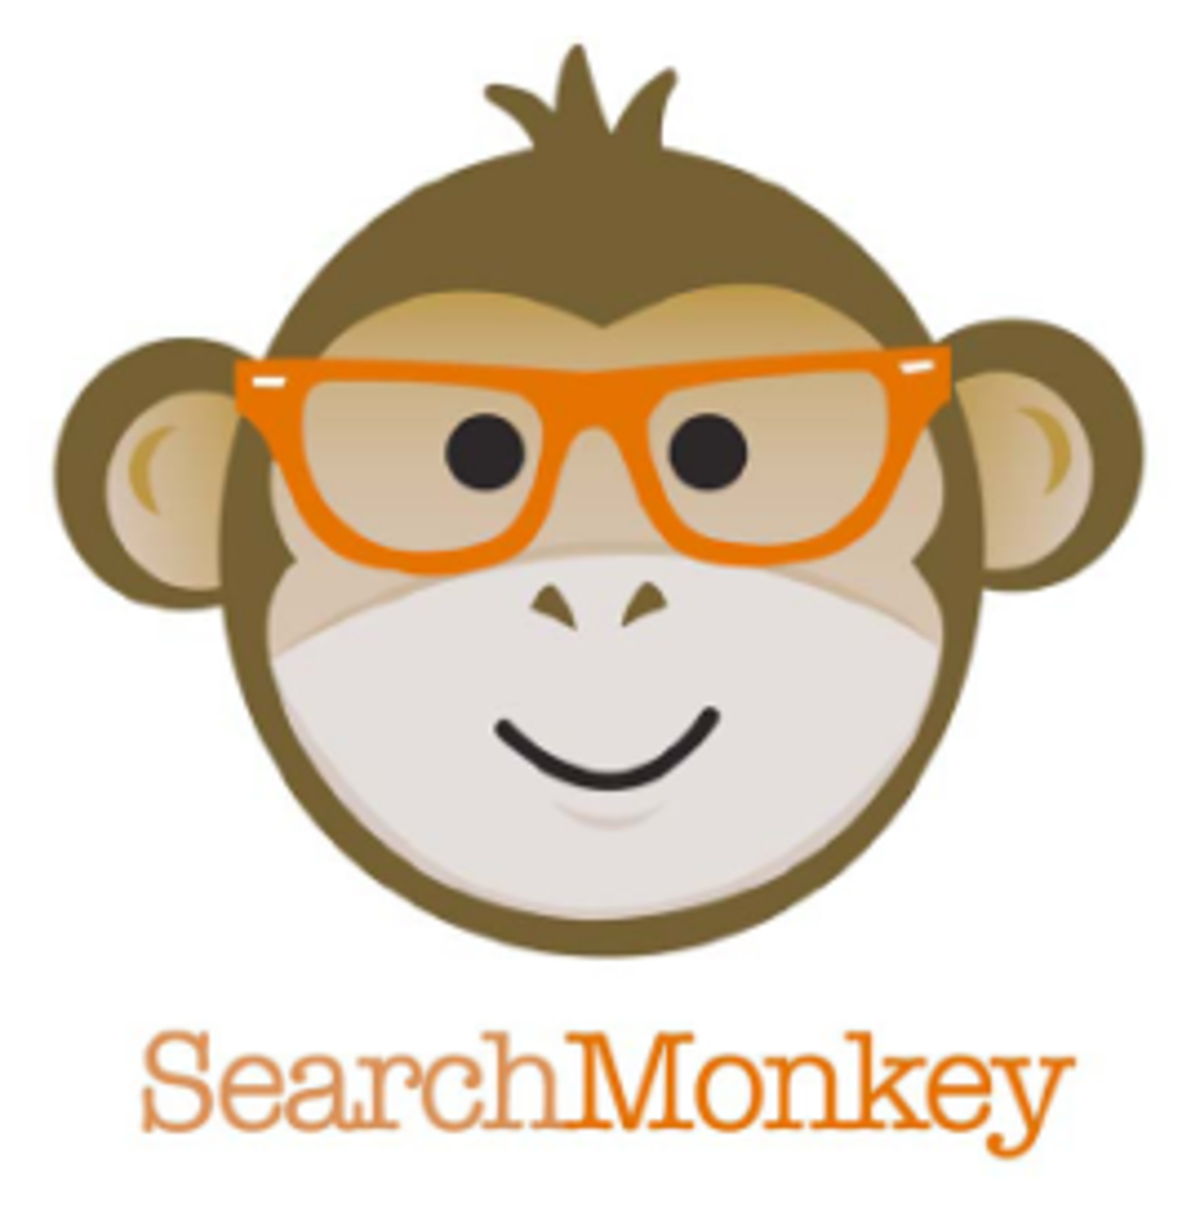 Yahoo's SearchMonkey service is no more, a victim of the Microsoft-Yahoo search outsourcing deal.